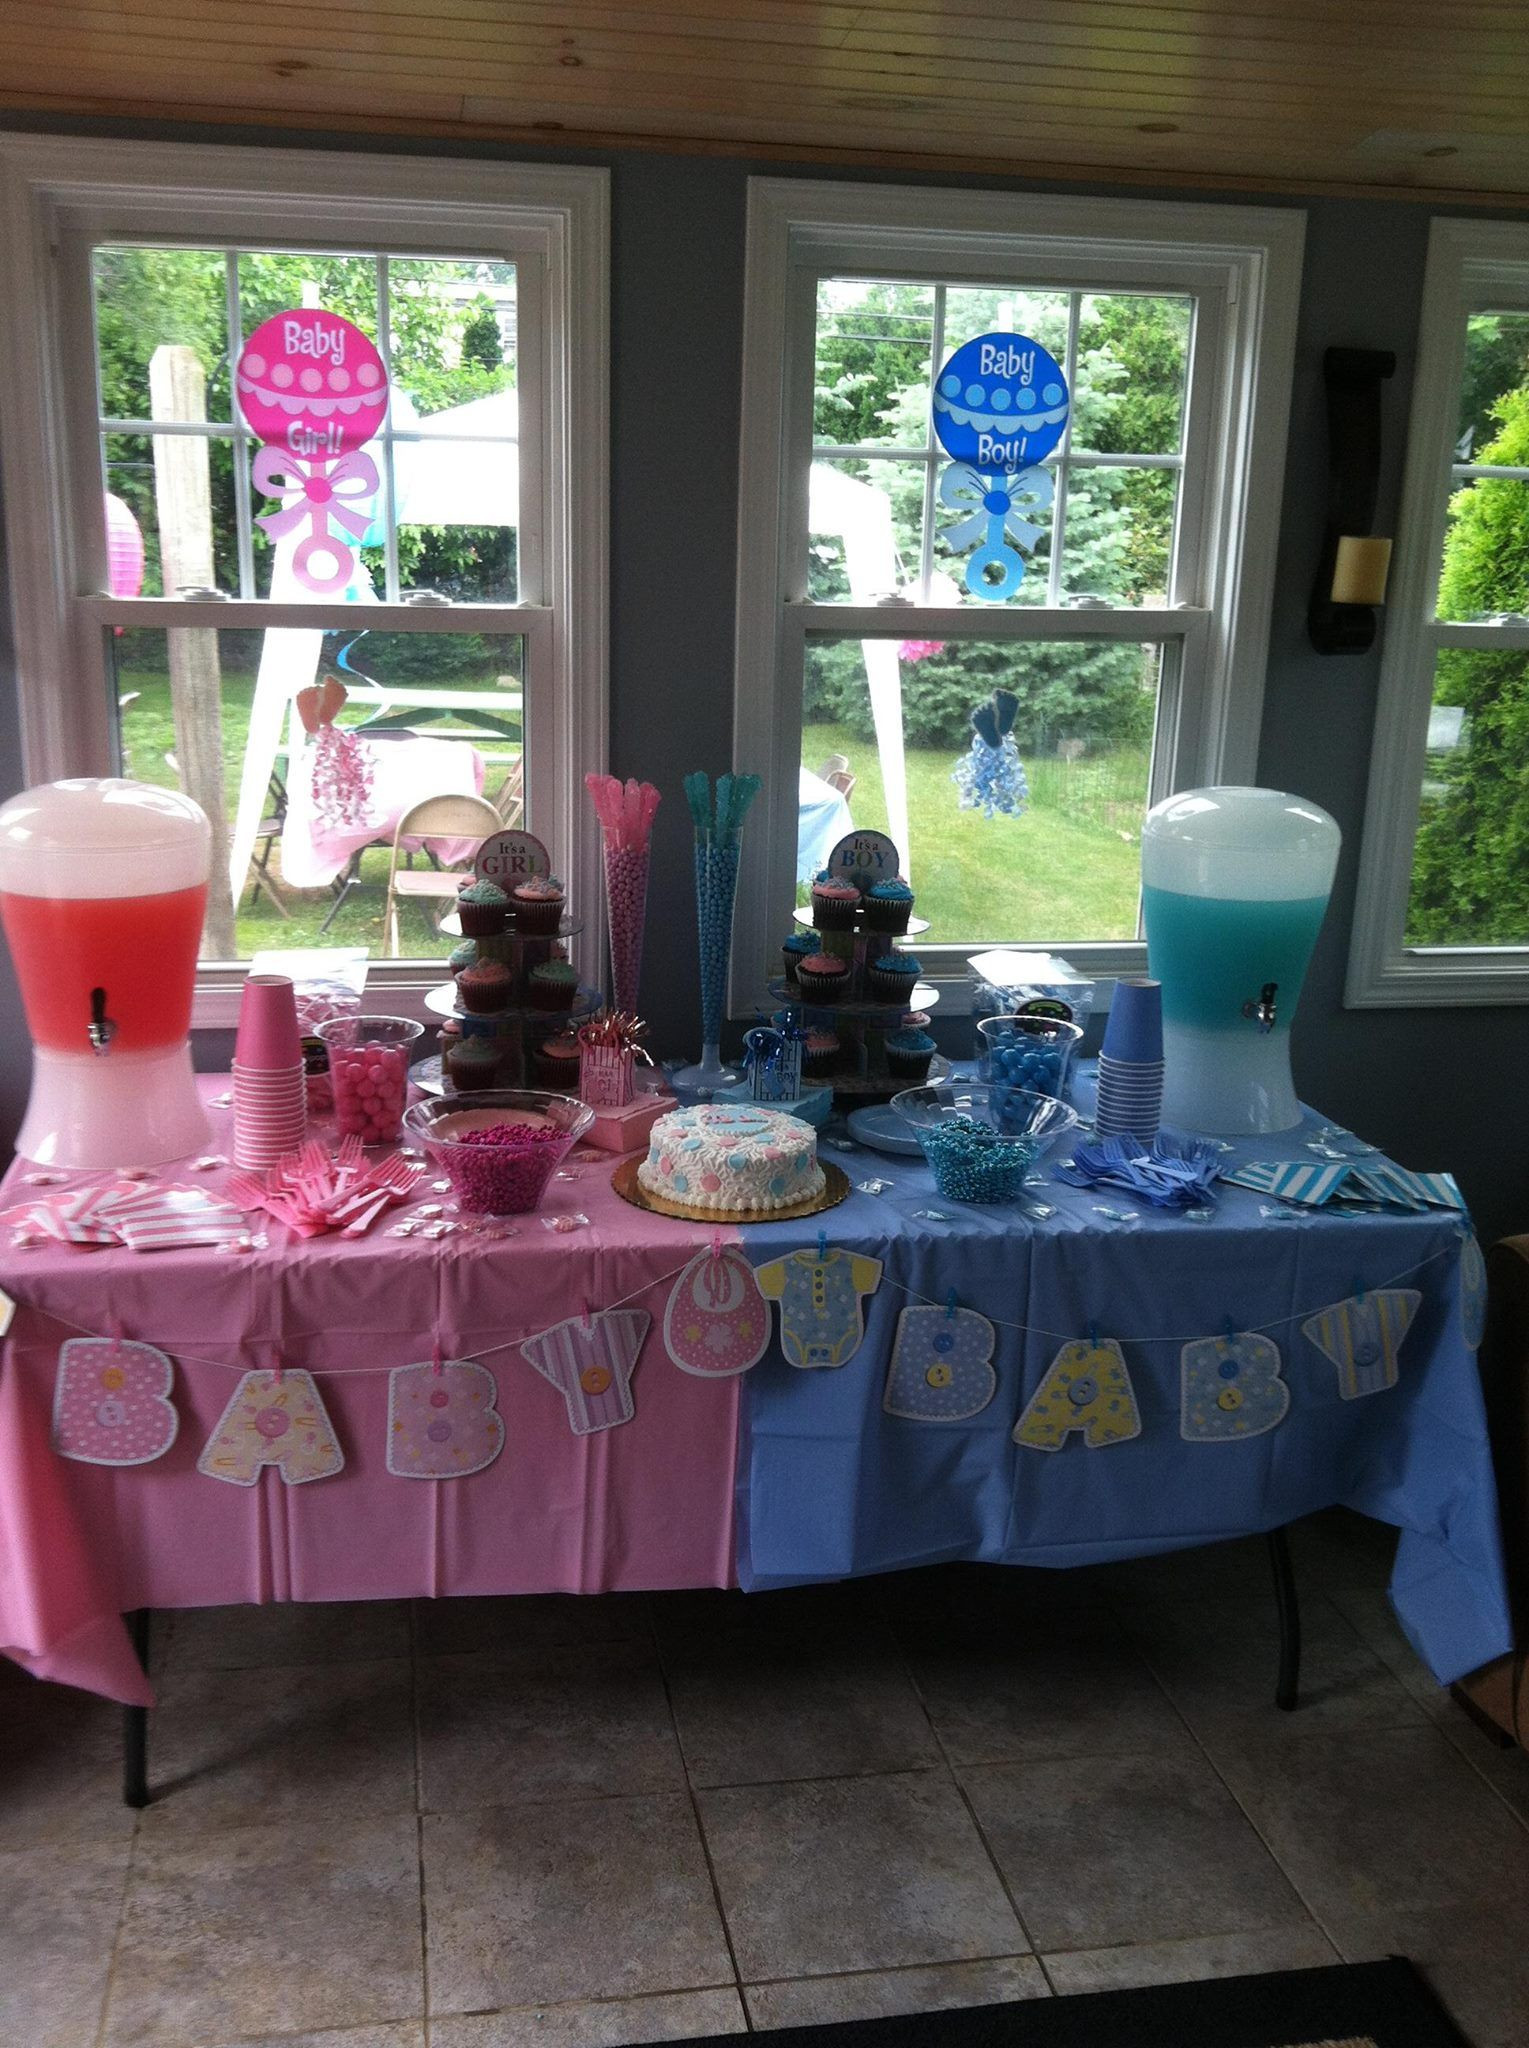 Baby Gender Reveal Party Ideas Pinterest
 10 Gender Reveal Party Food Ideas for your Family